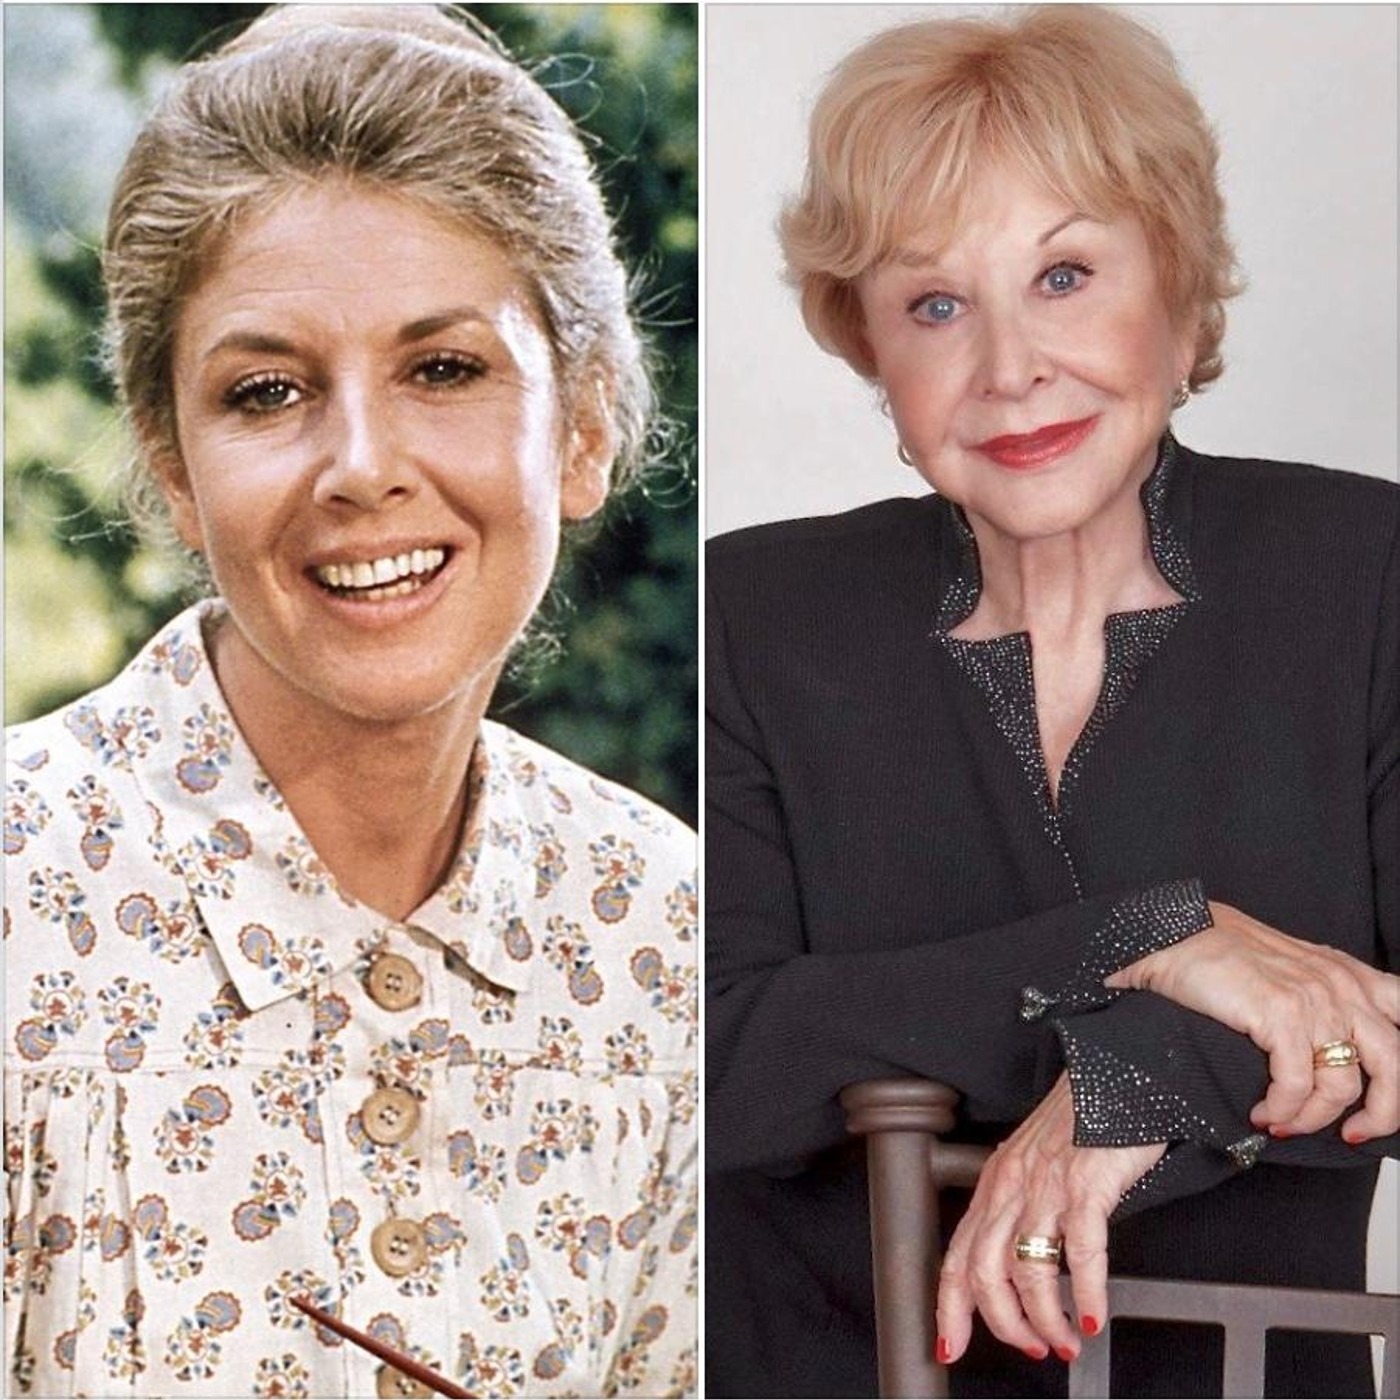 S1 E45 Guest - actress Michael Learned